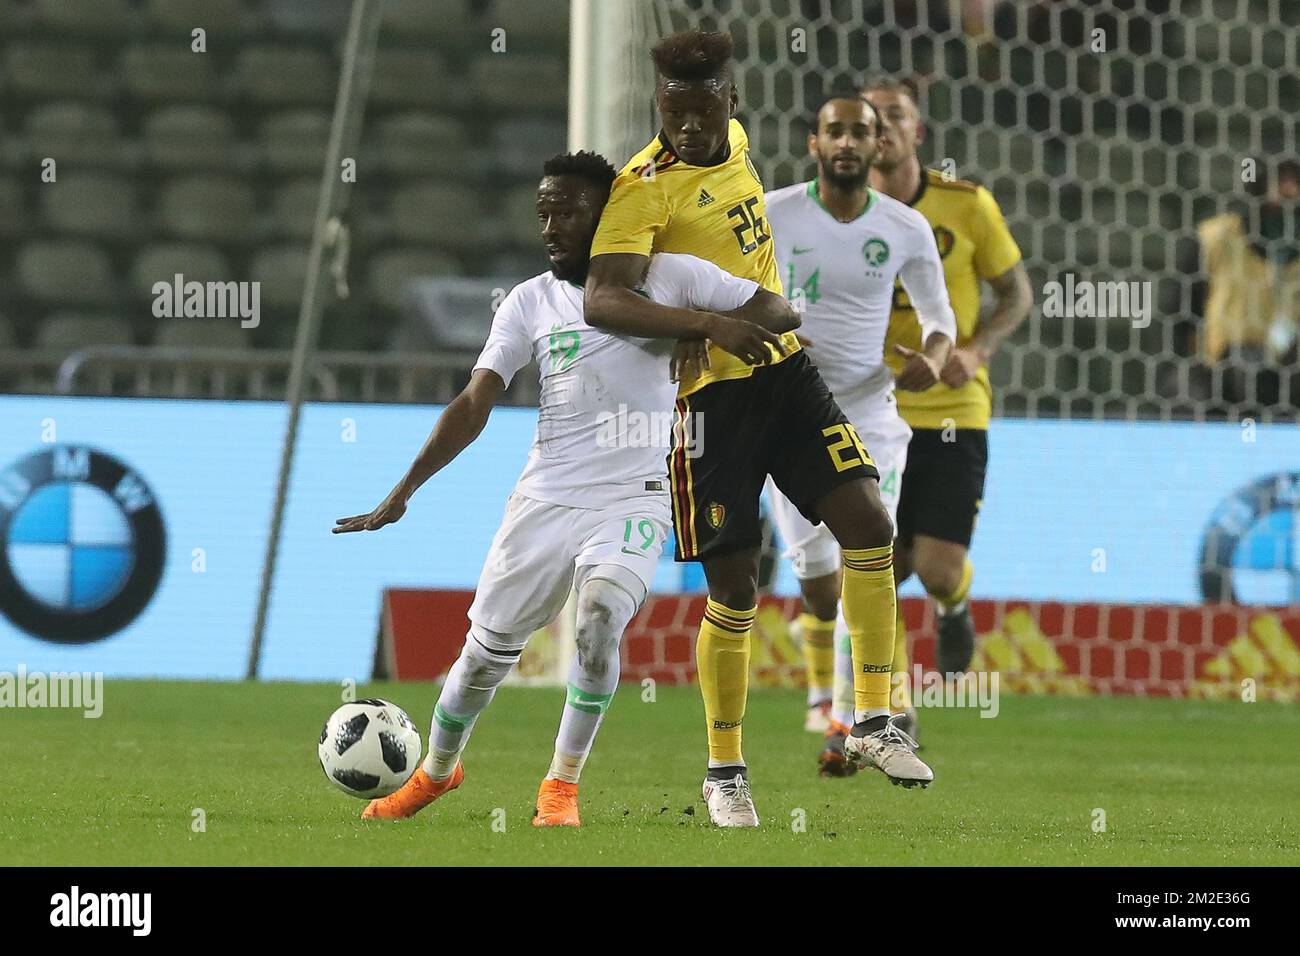 Saudi Arabia's midfielder Fahad Al-Muwallad and Belgium's Anthony Limbombe fight for the ball during a friendly game between the Red Devils Belgian National soccer team and Saudi Arabia, in Brussels, Tuesday 27 March 2018. BELGA PHOTO BRUNO FAHY Stock Photo